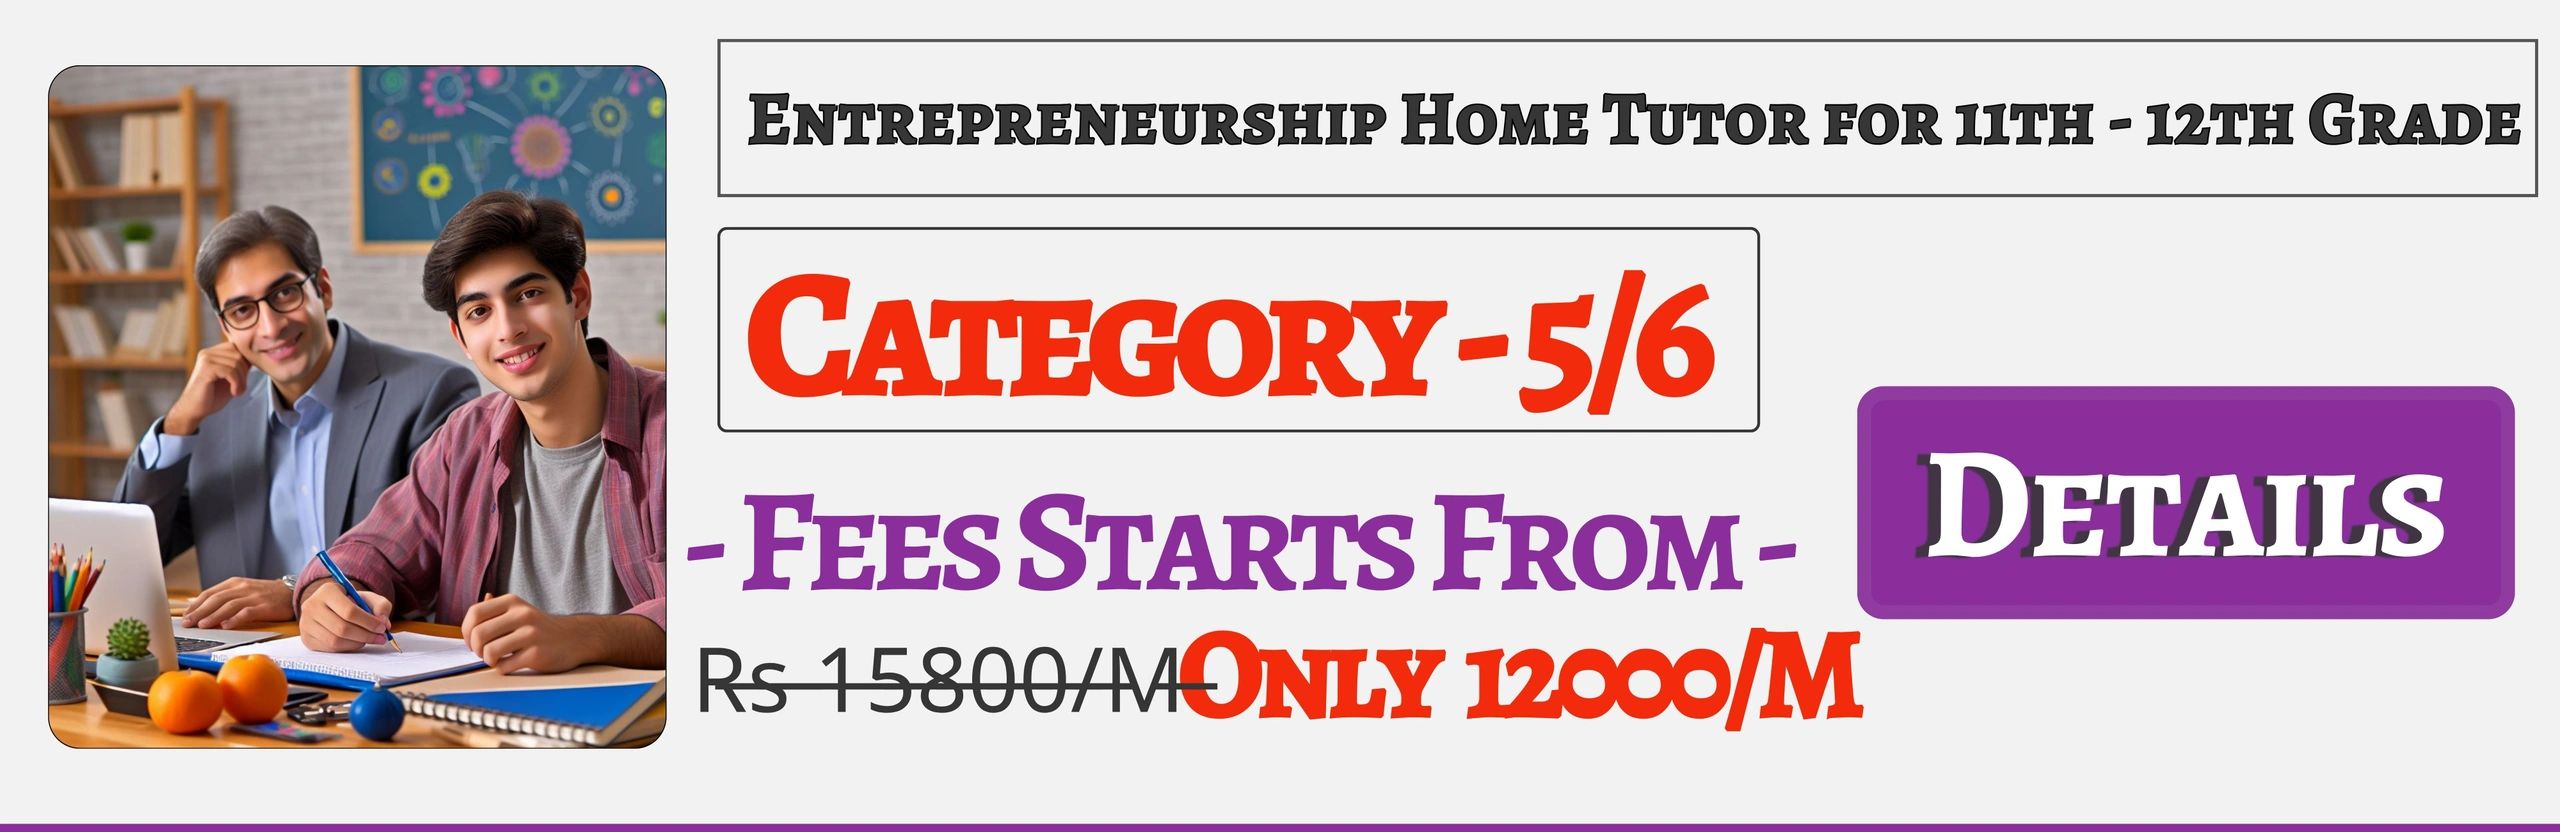 Book Best Nearby Entrepreneurship Home Tuition Tutors For 11th & 12th In Jaipur , Fees Only 12000/M